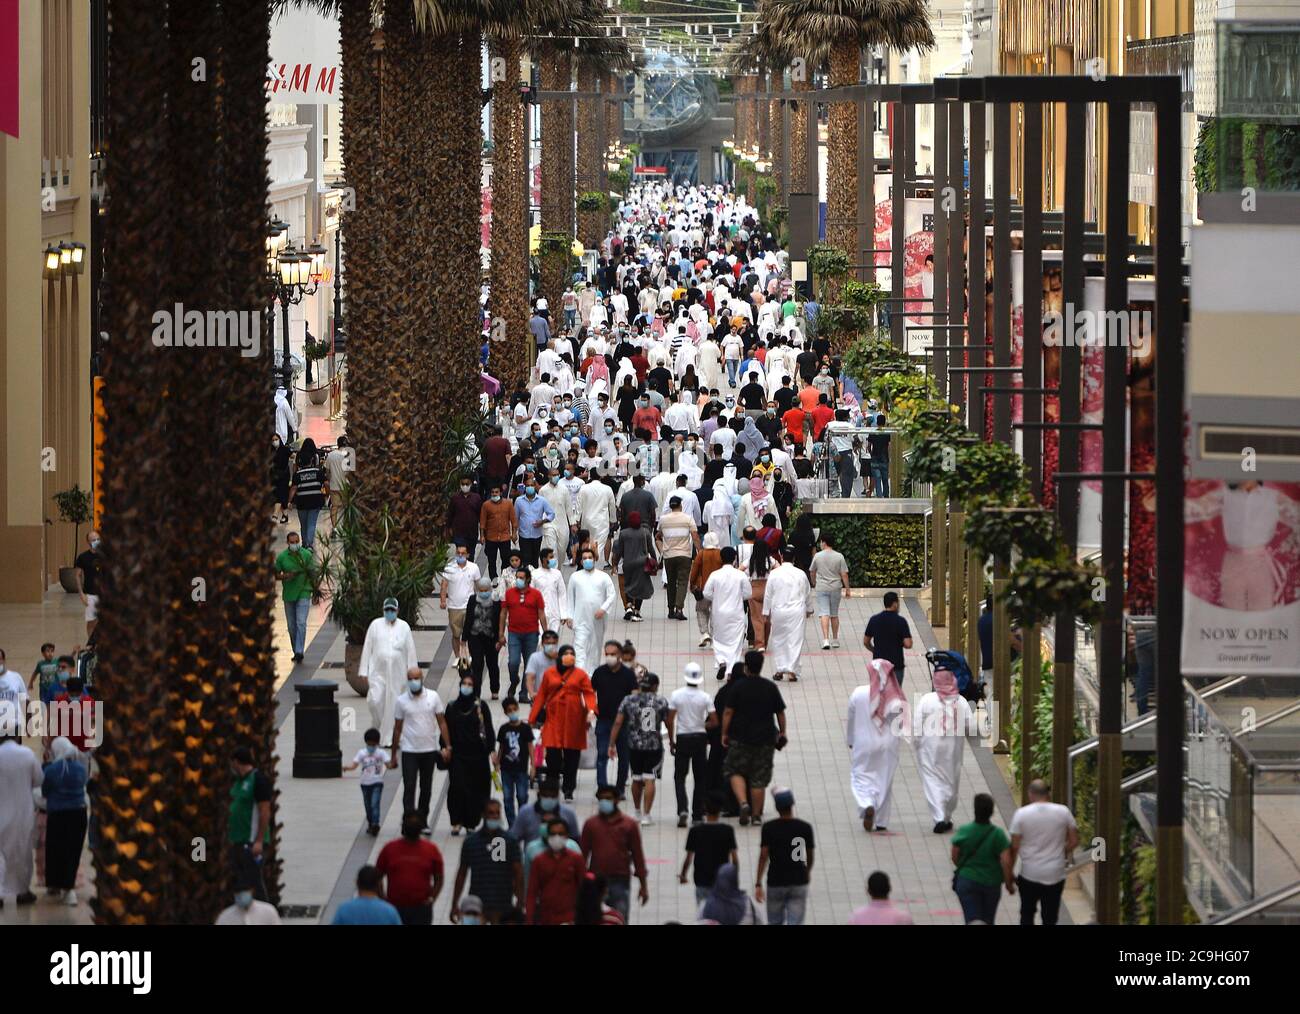 The Avenues Kuwait - The Avenues receives 1.5 mn visitors during Eid week,  including 1 mn during Eid holiday. More than one million people visited The  Avenues during the Eid Al Fitr